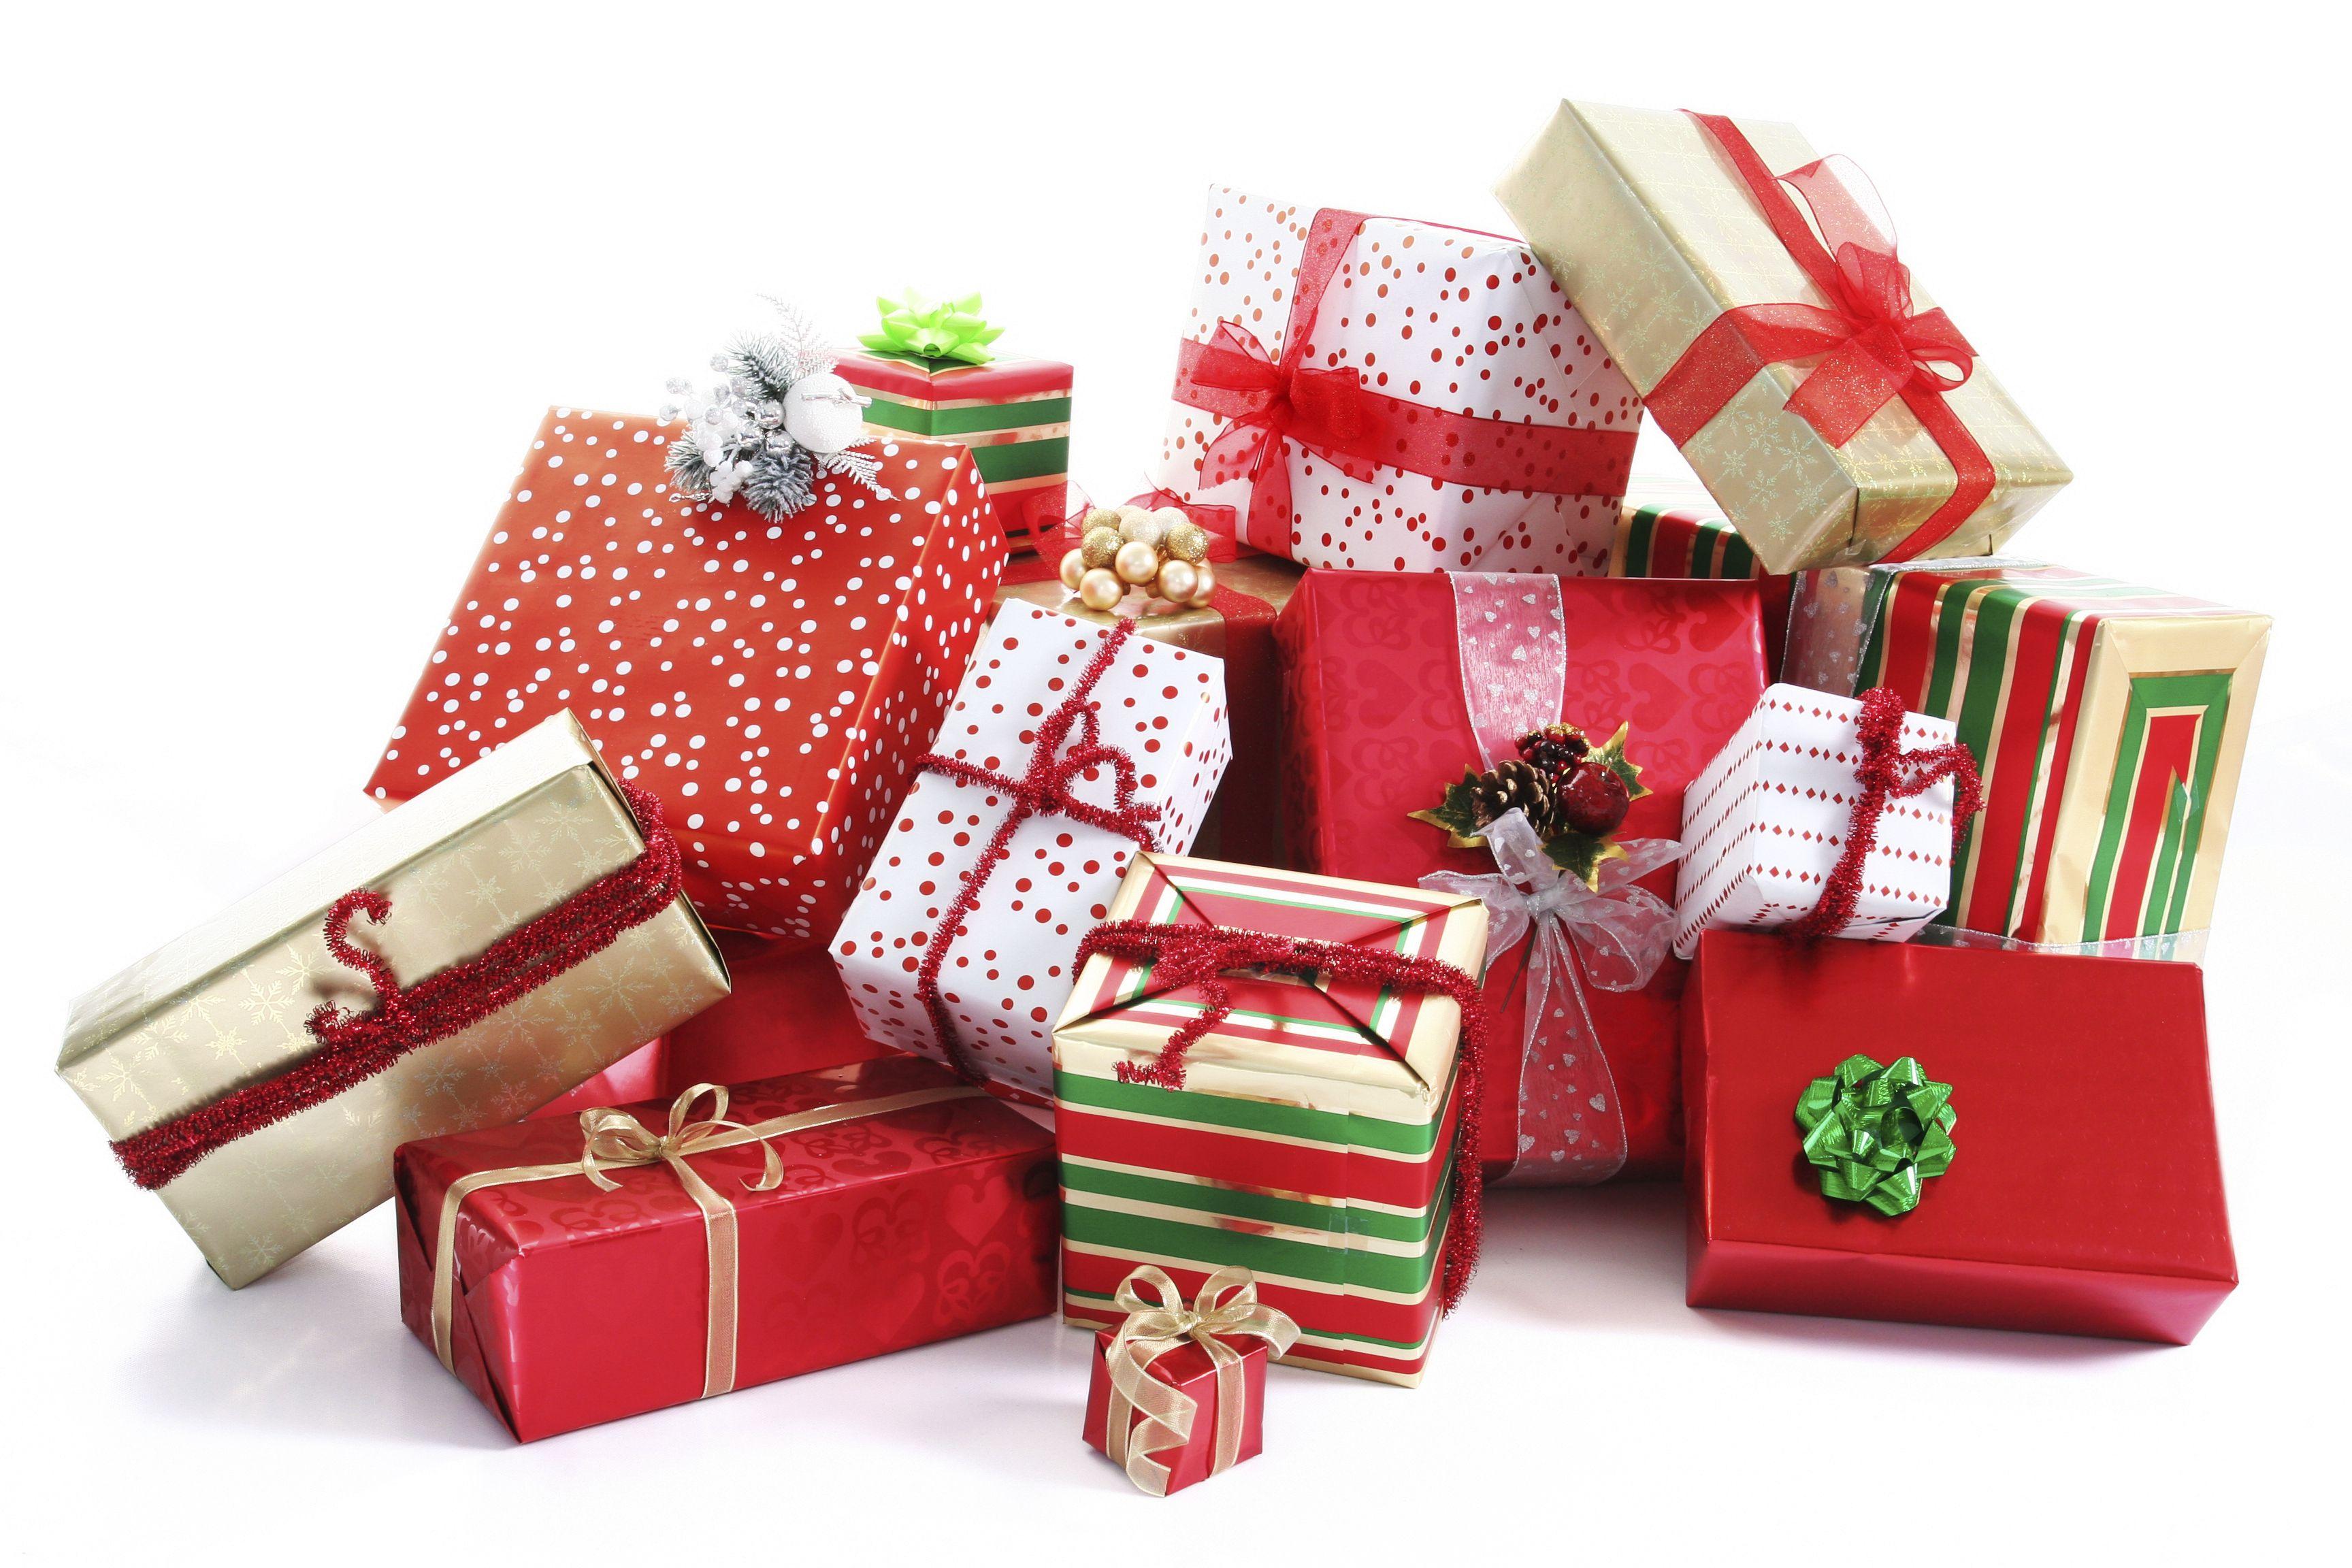 Top Selection of Gift Image